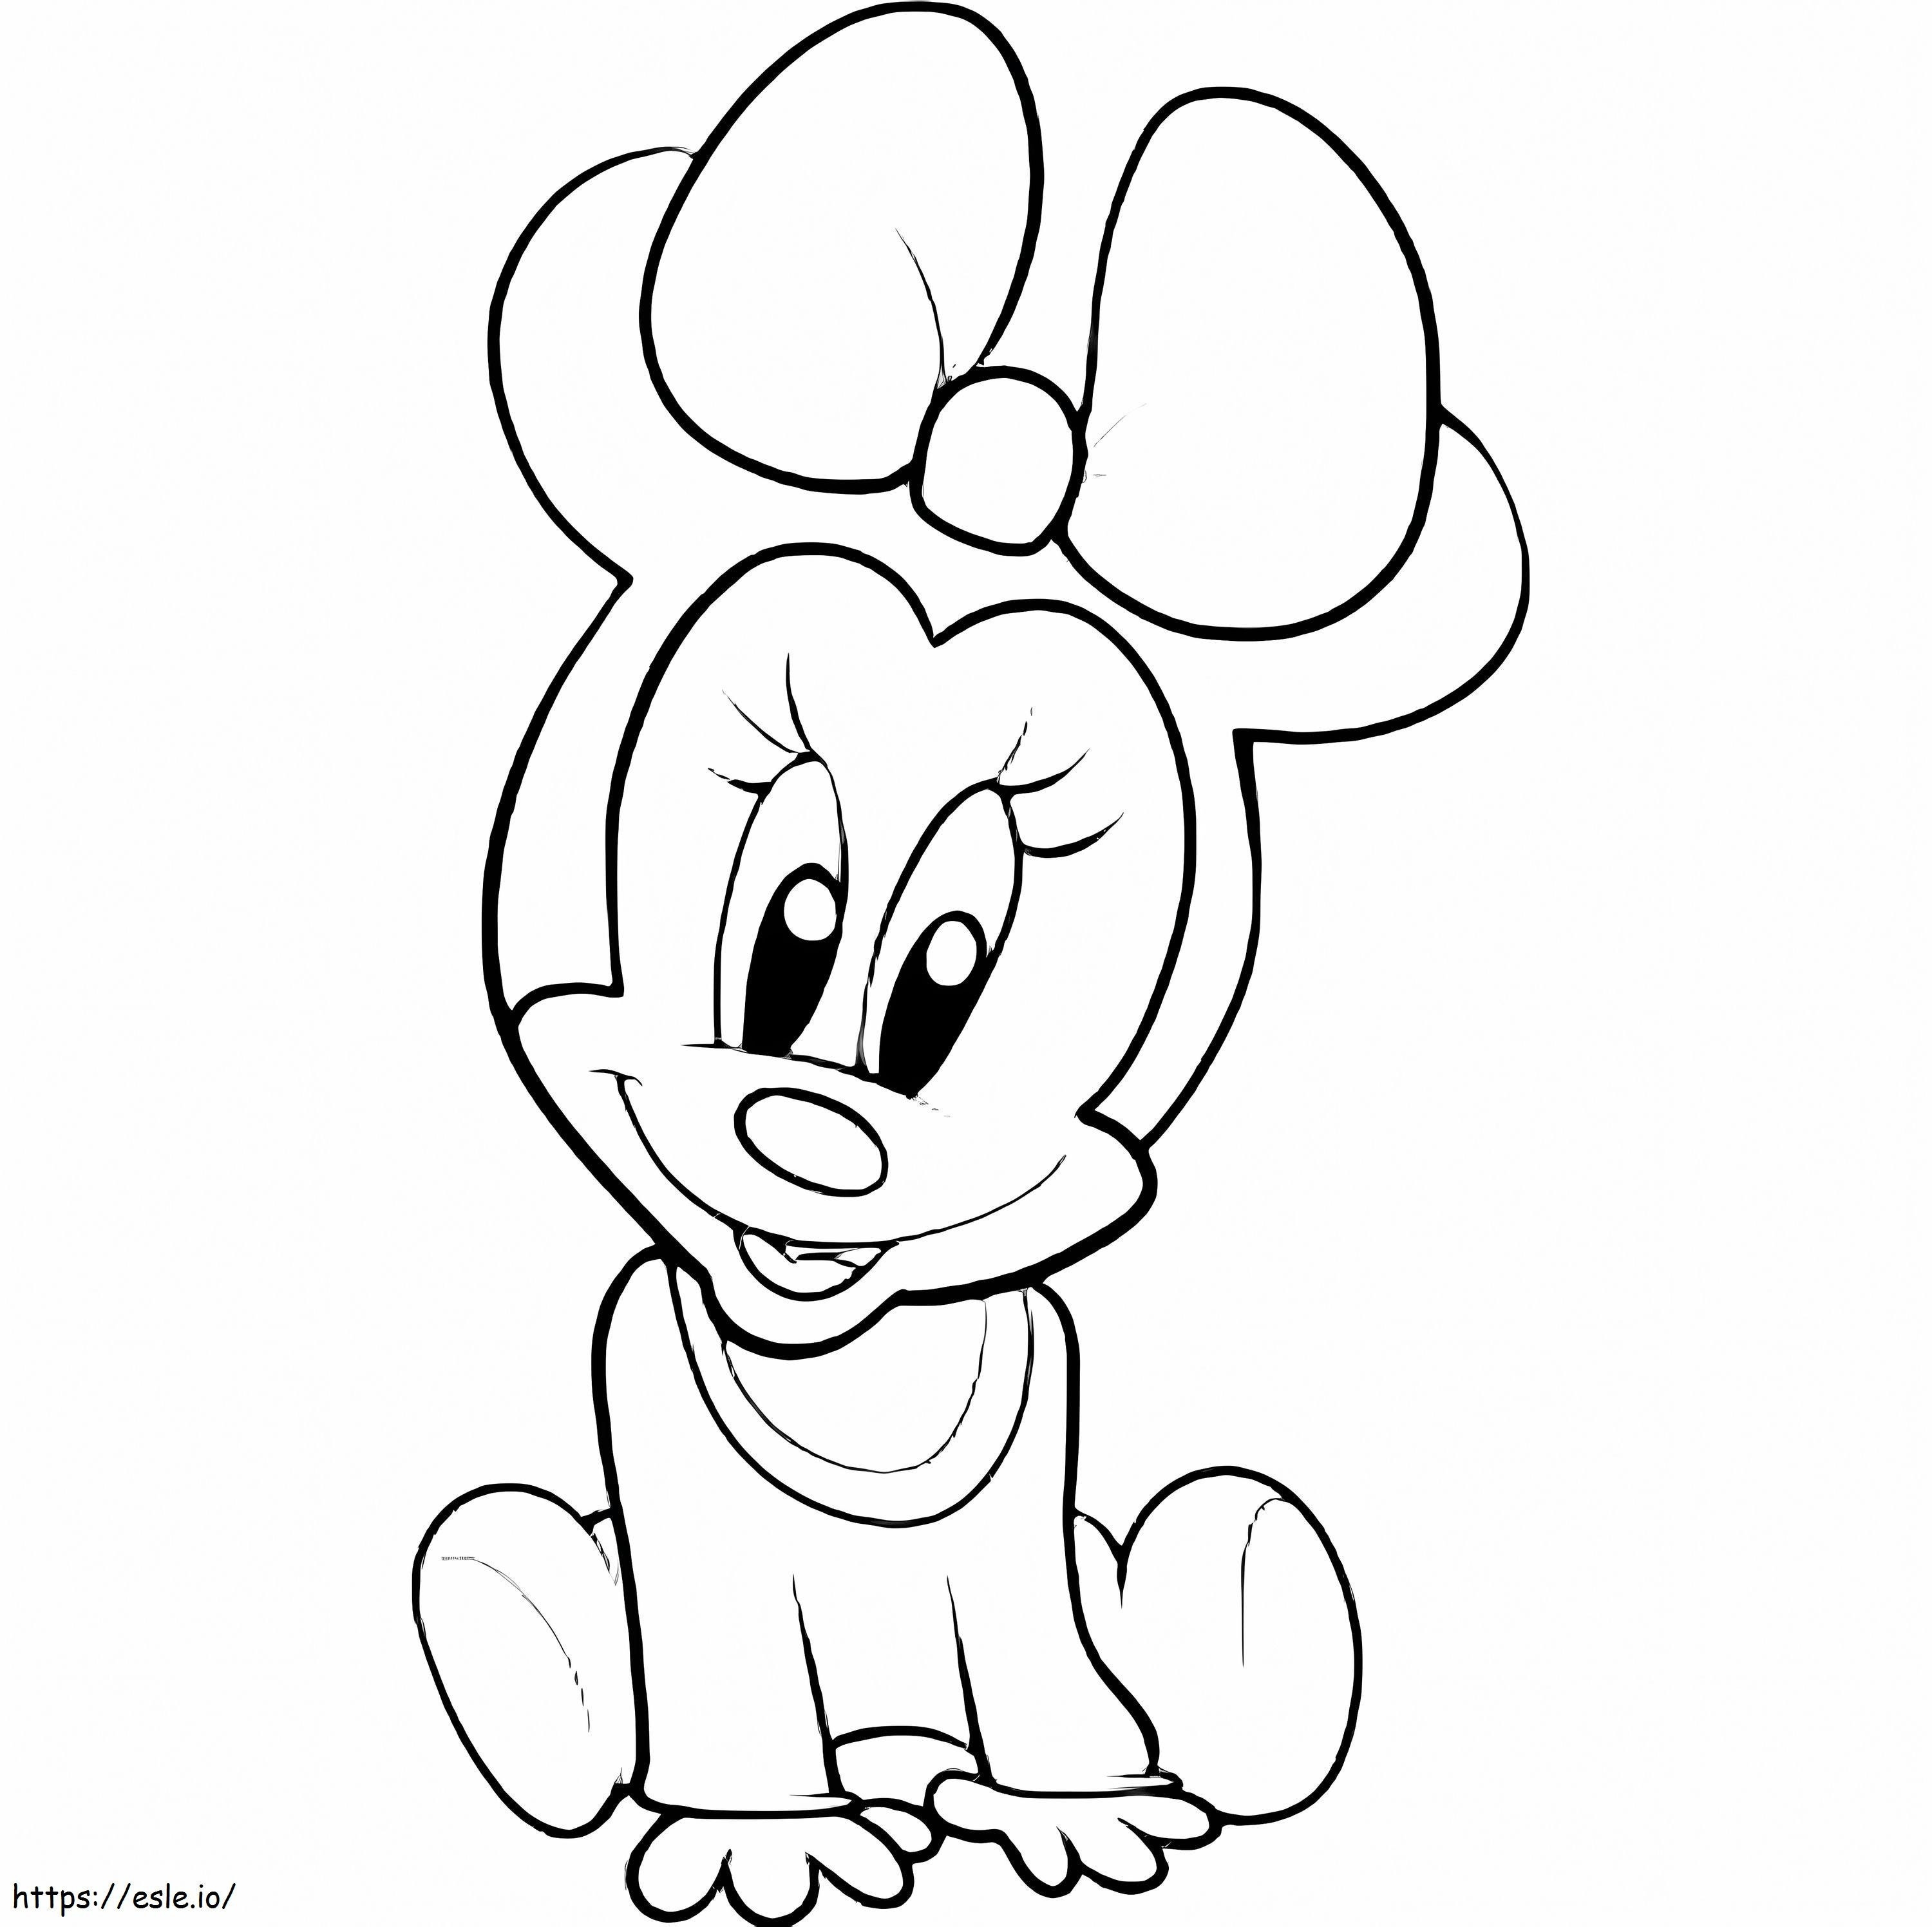 Cute Baby Minnie Mouse coloring page